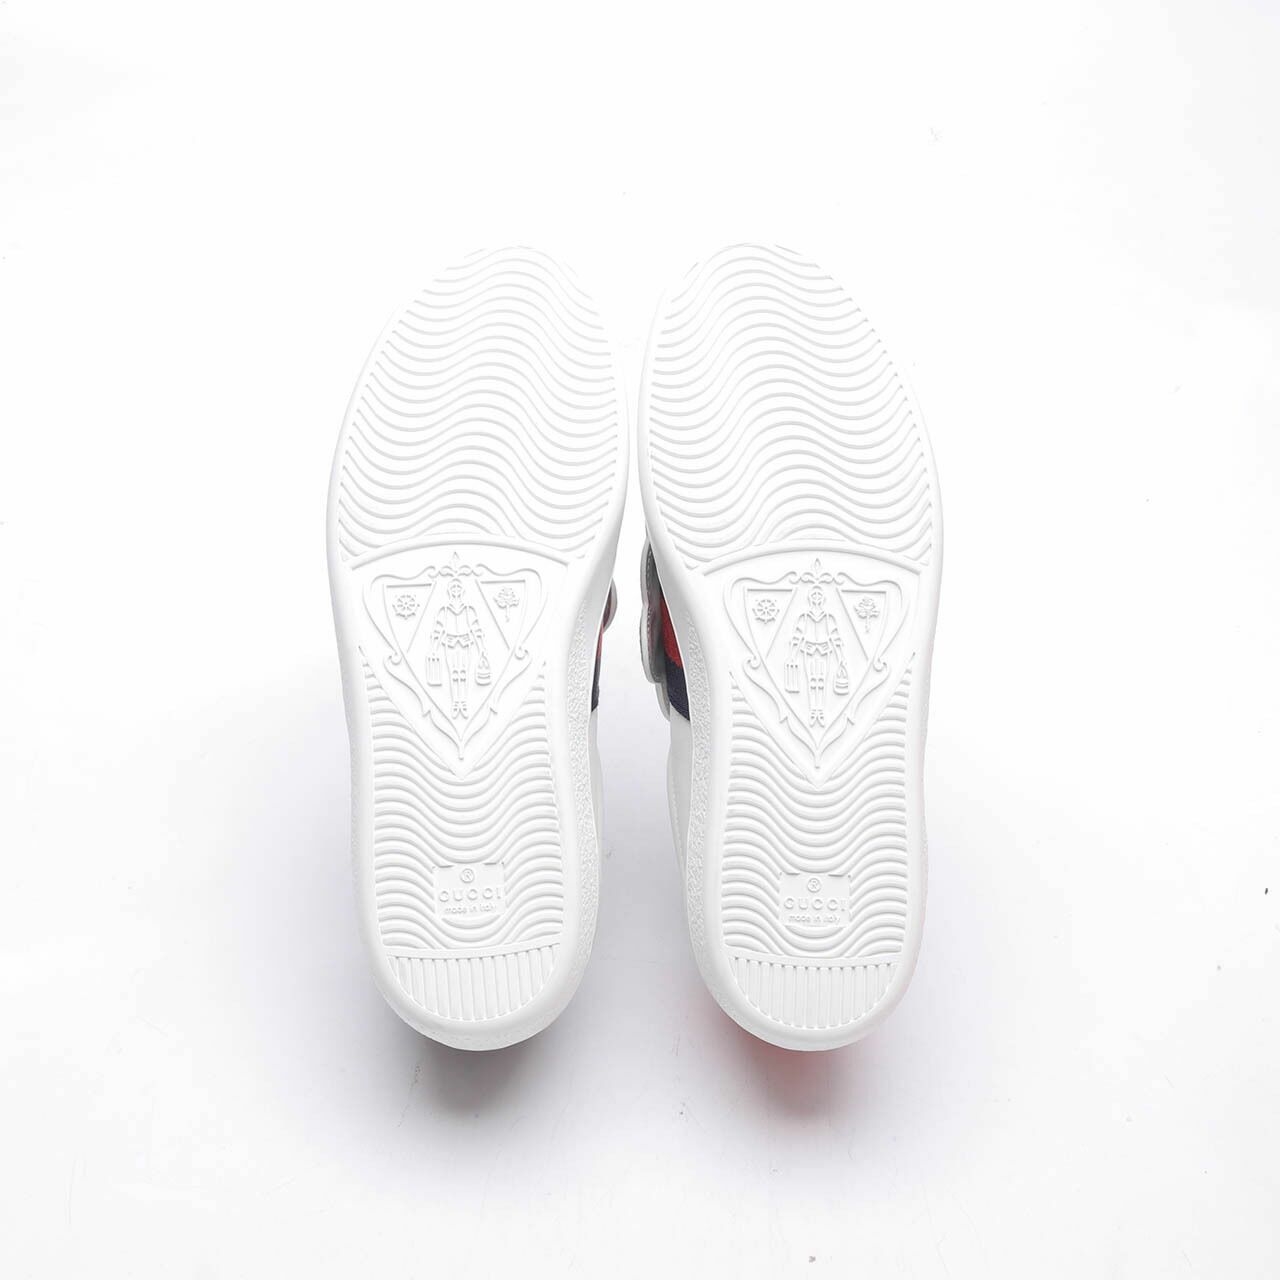 Gucci Ace with Removable Patches White Sneakers